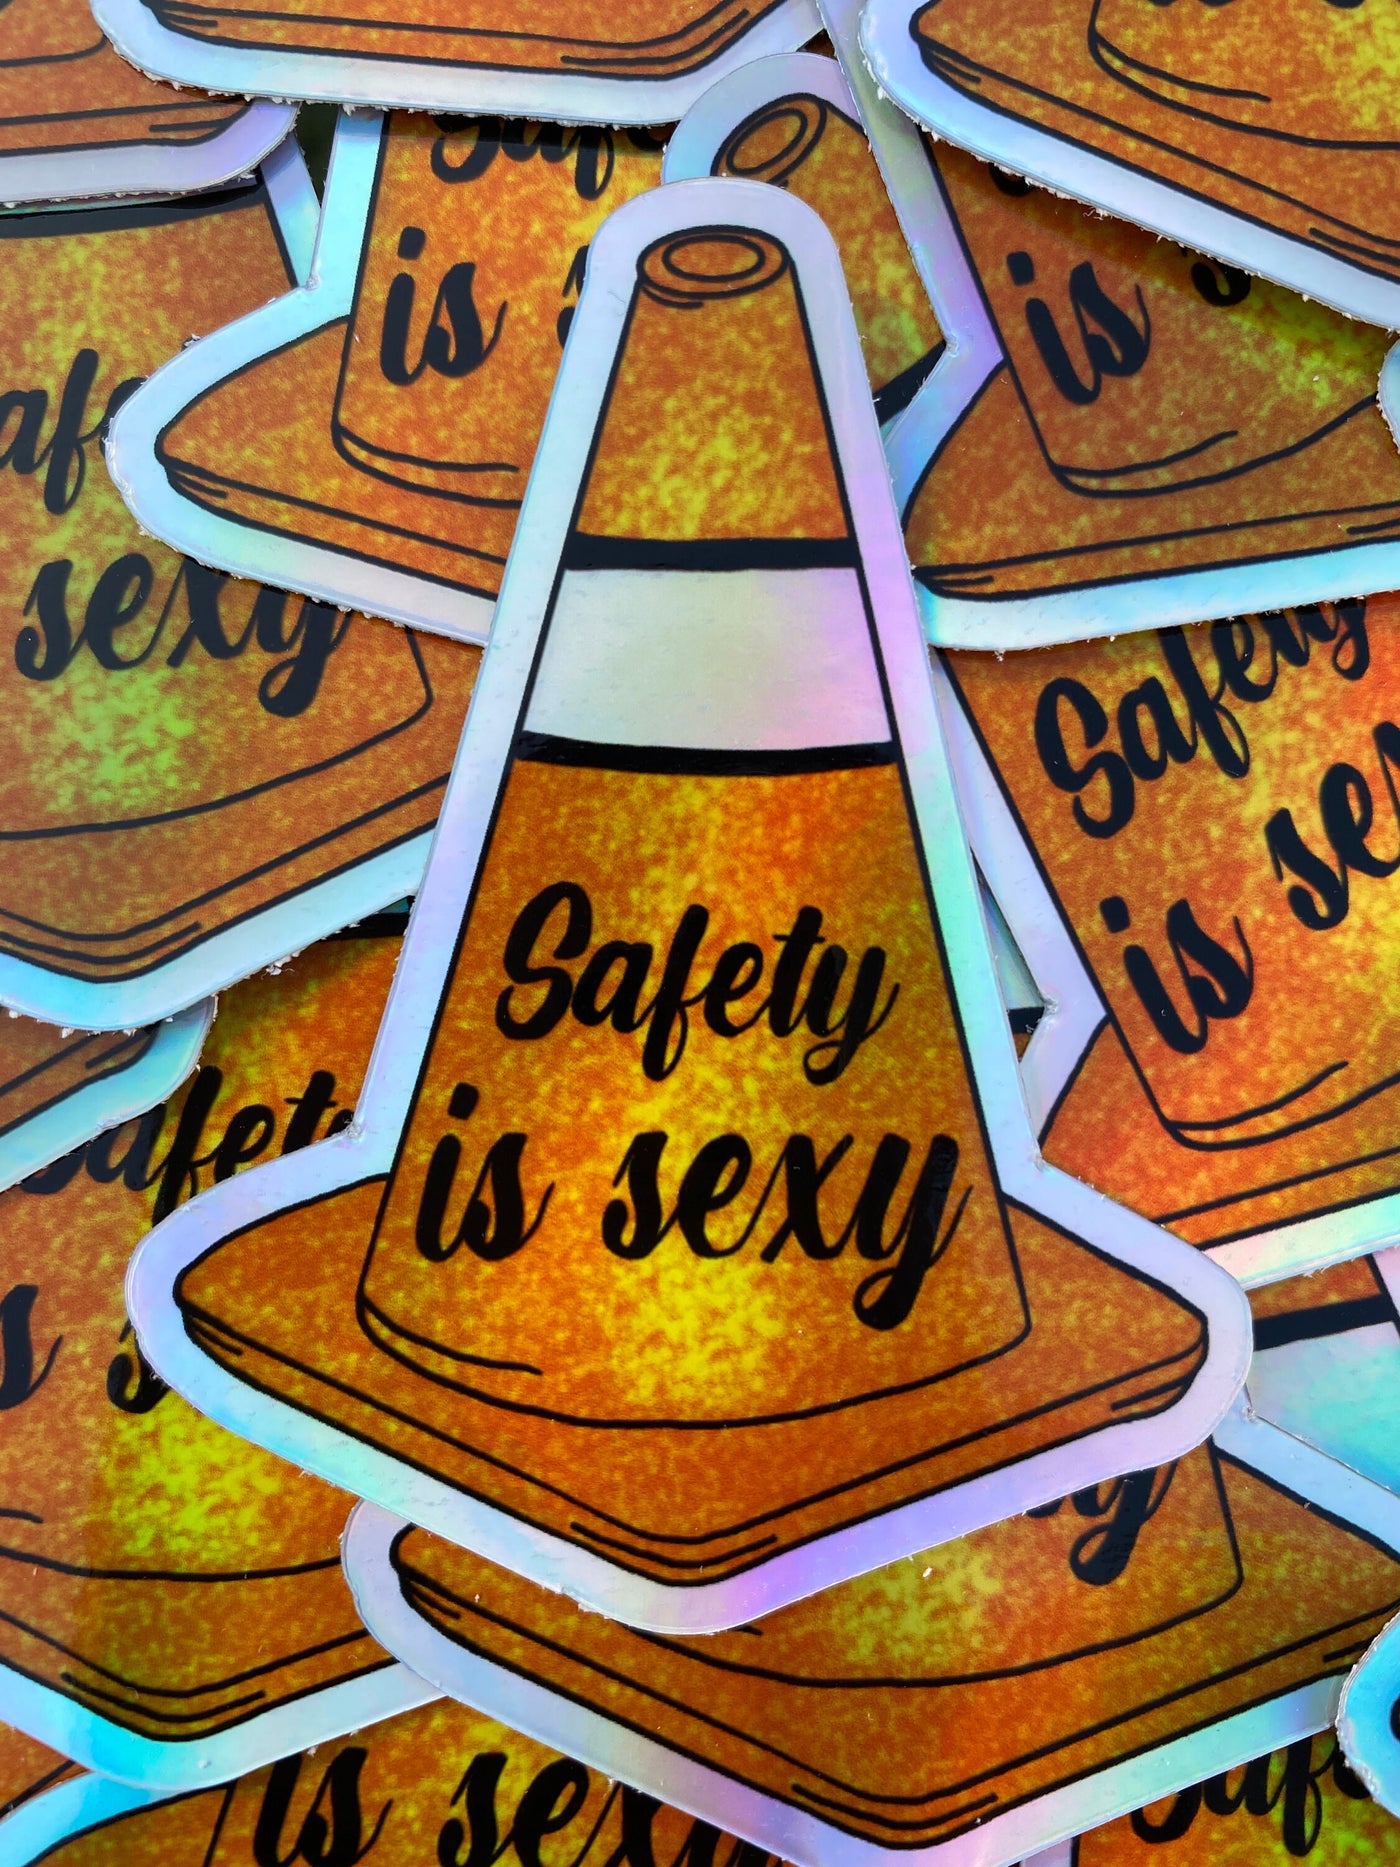 SAFETY IS SEXY Holographic Sticker!